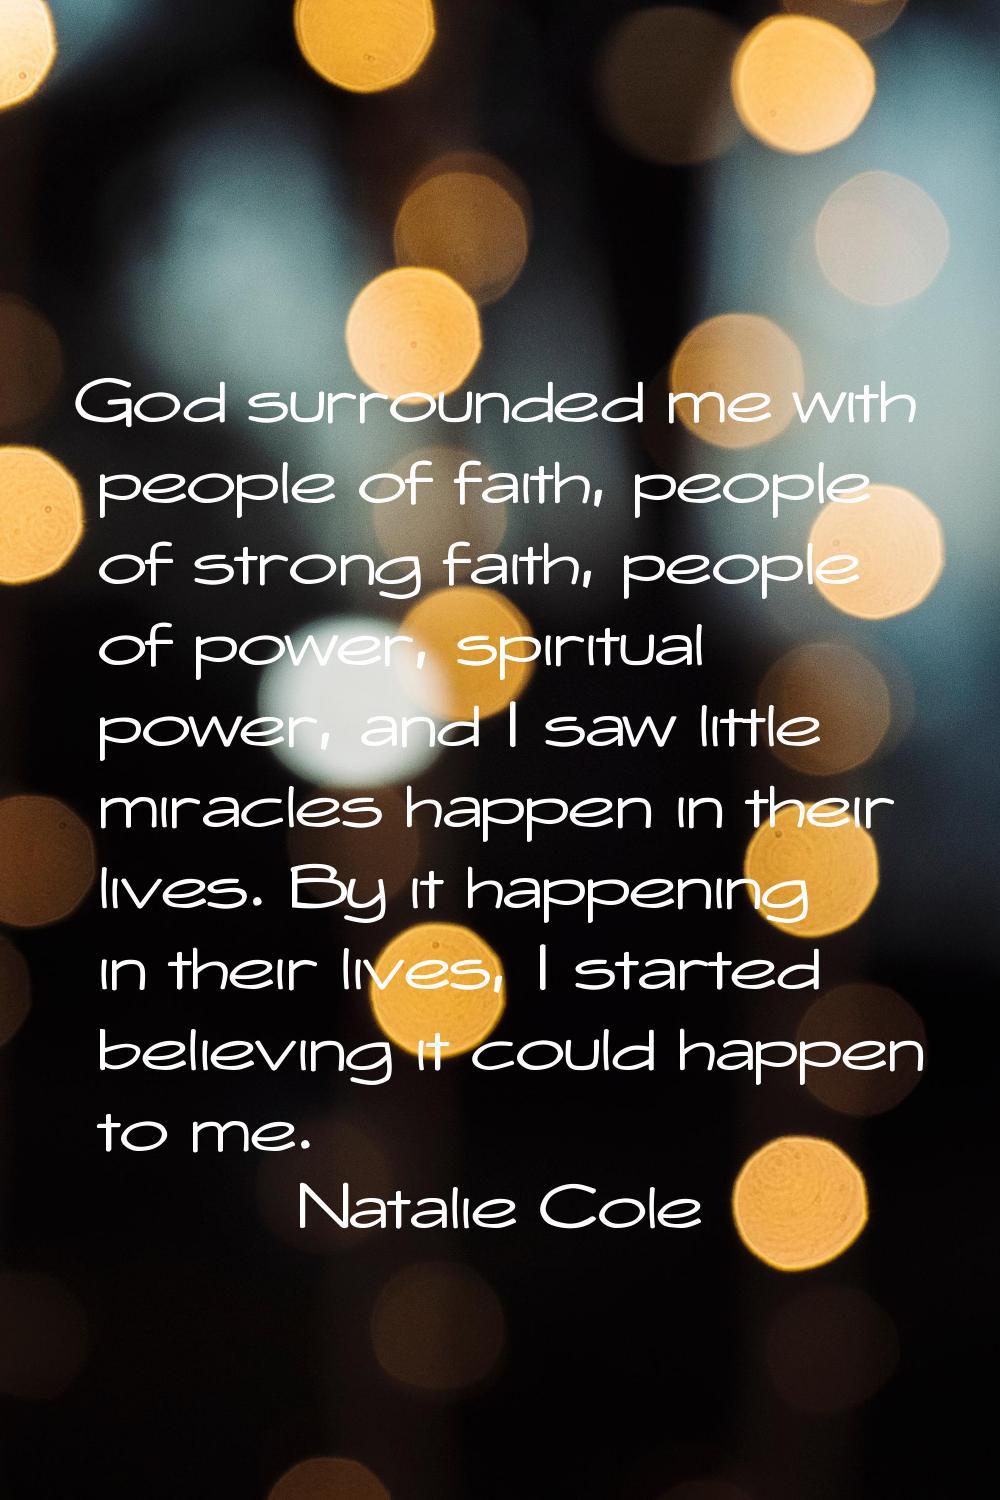 God surrounded me with people of faith, people of strong faith, people of power, spiritual power, a